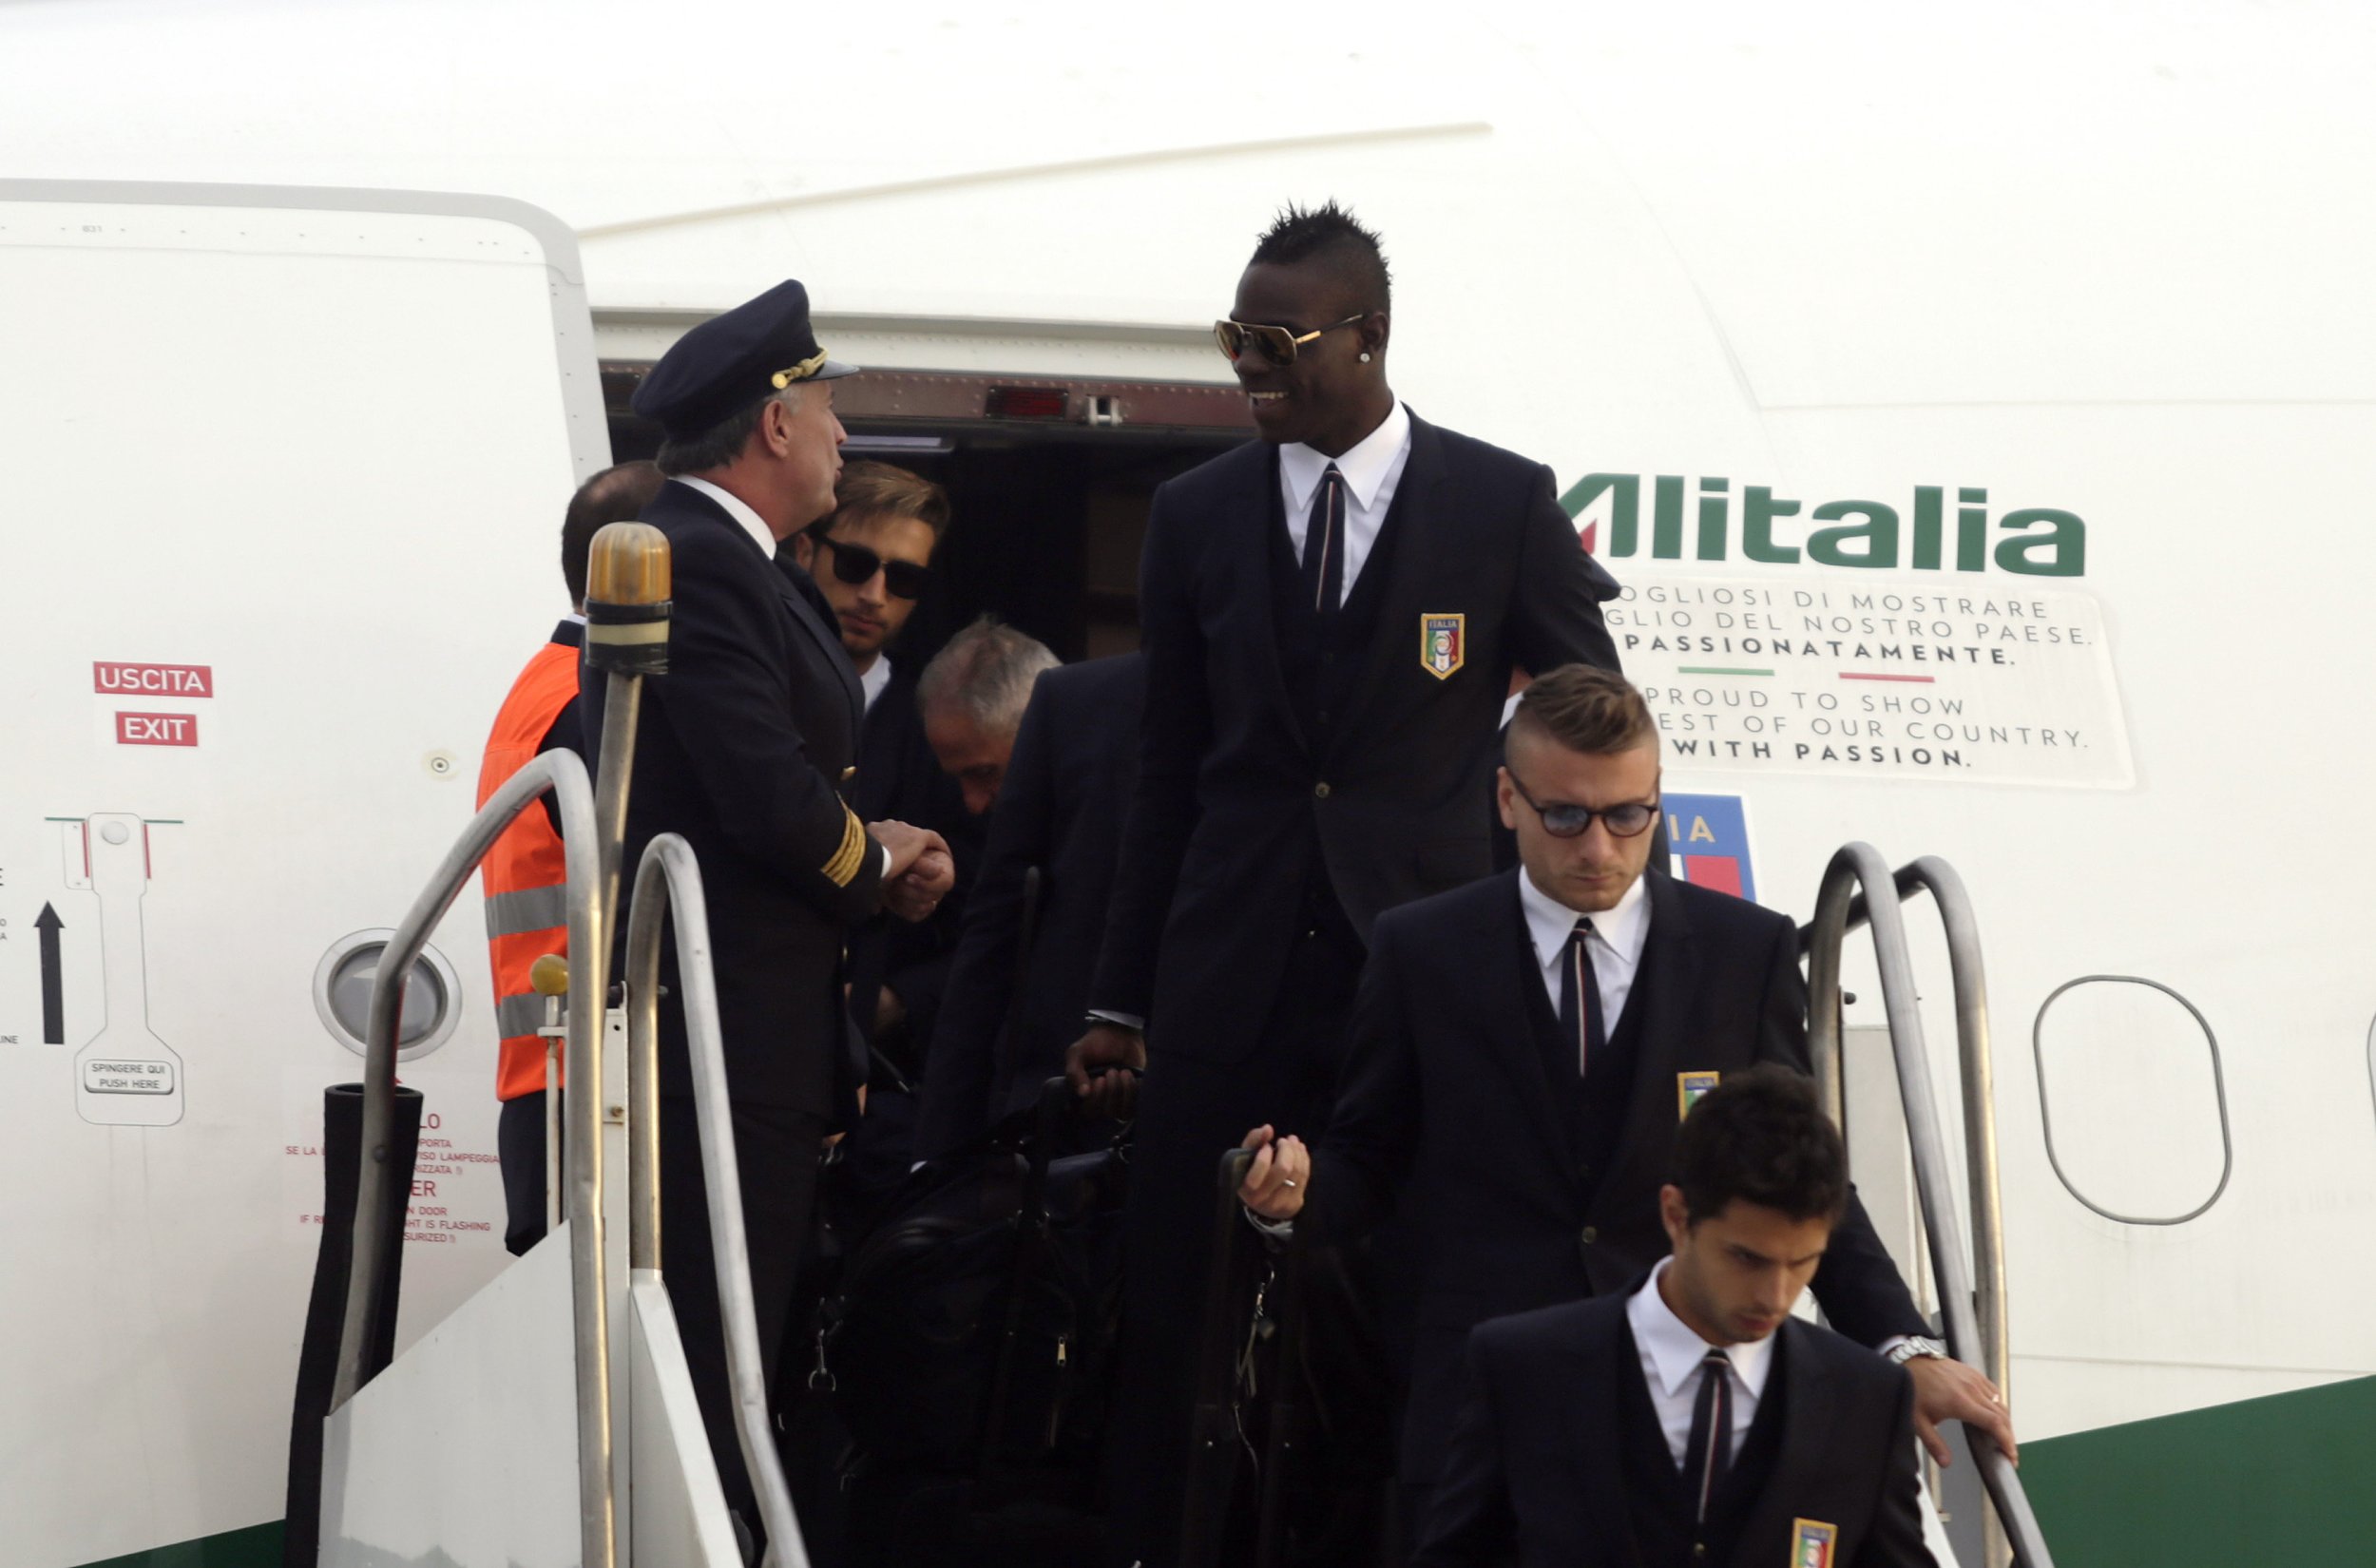 2014 World Cup - Italy Arrival